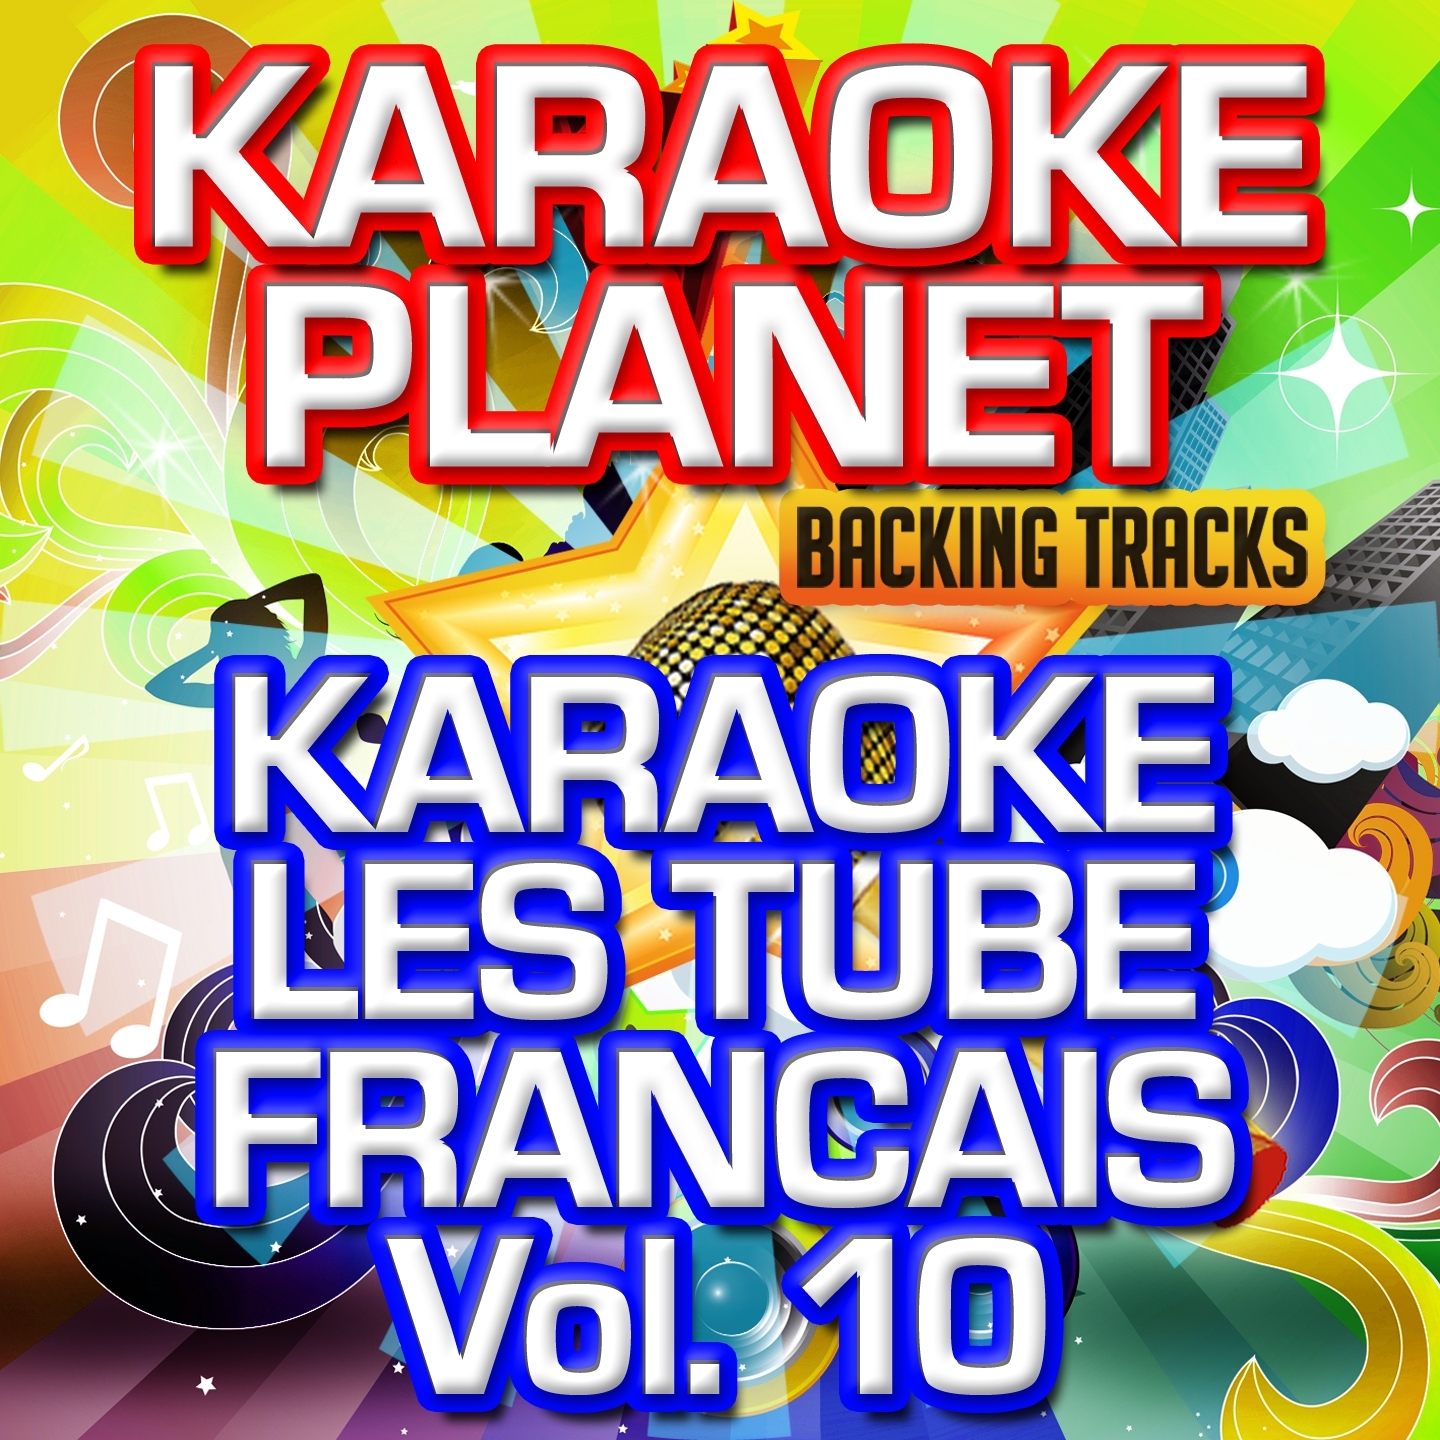 Closer to Free (TV Theme from Party of Five) [Karaoke Version] (Originally Performed By Bodeans)